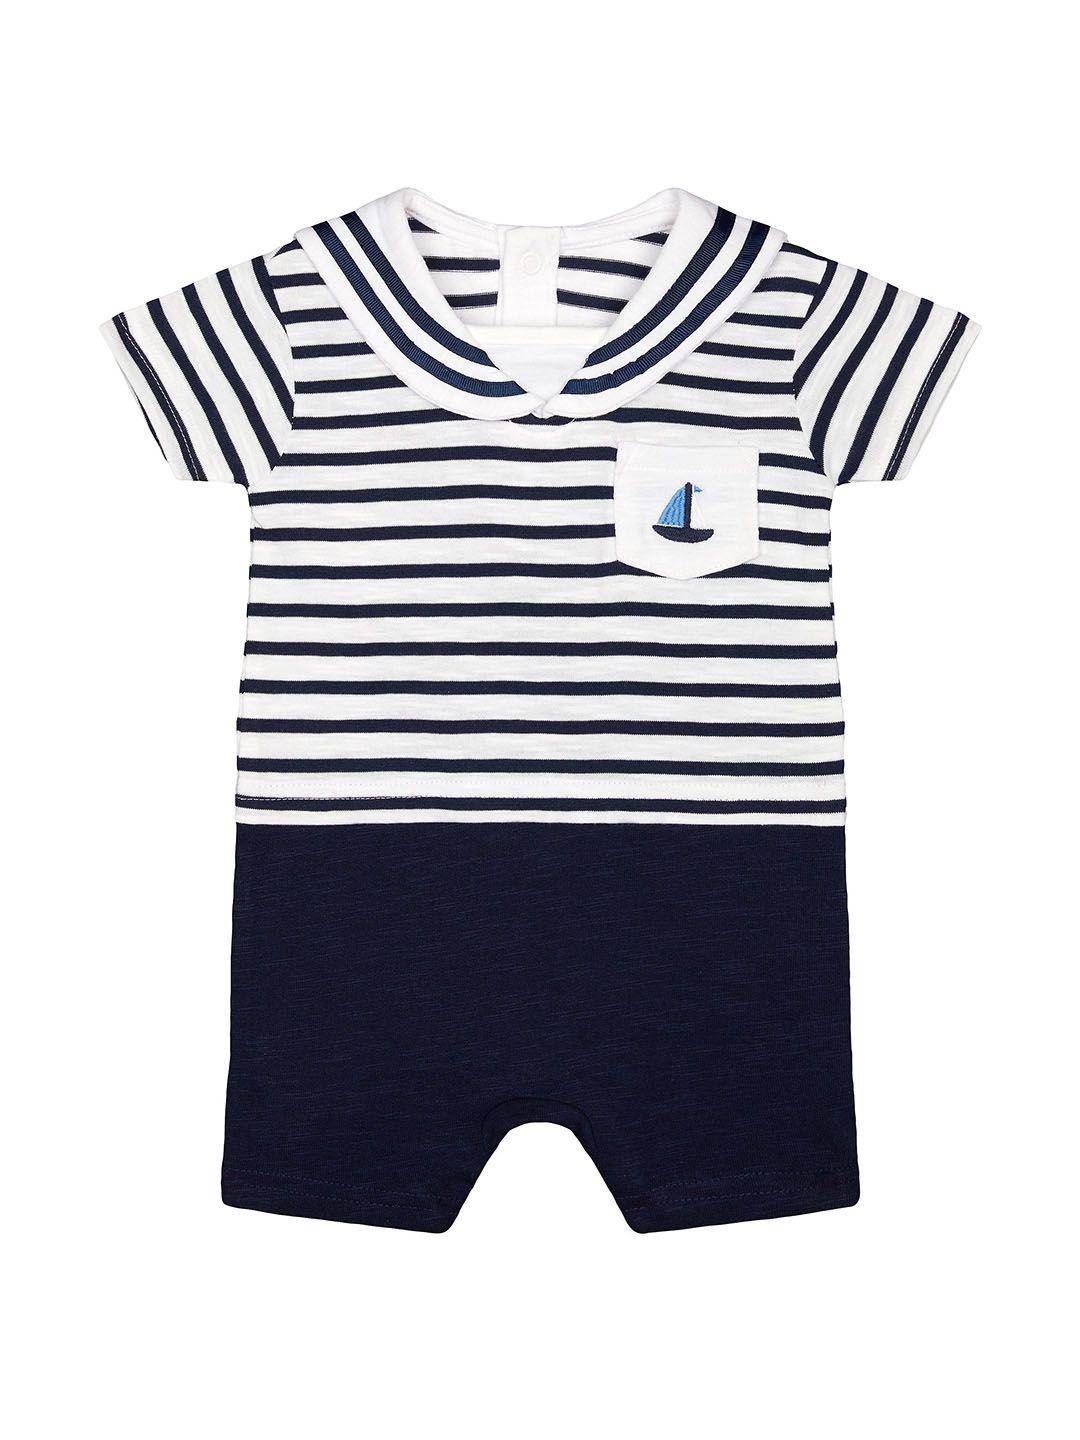 mothercare infant boys navy blue & white cotton striped rompers